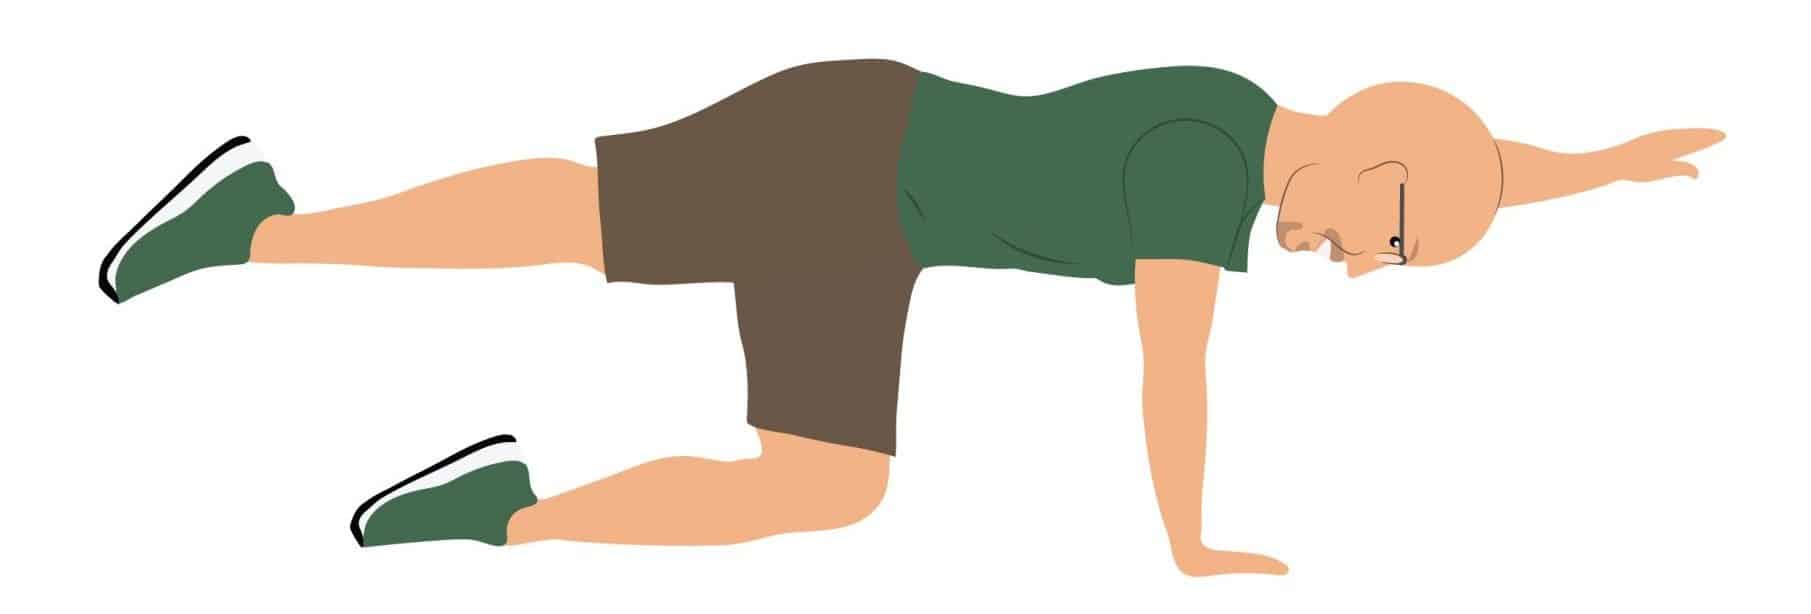 bird dog is easy but effective abdominal exercise for seniors